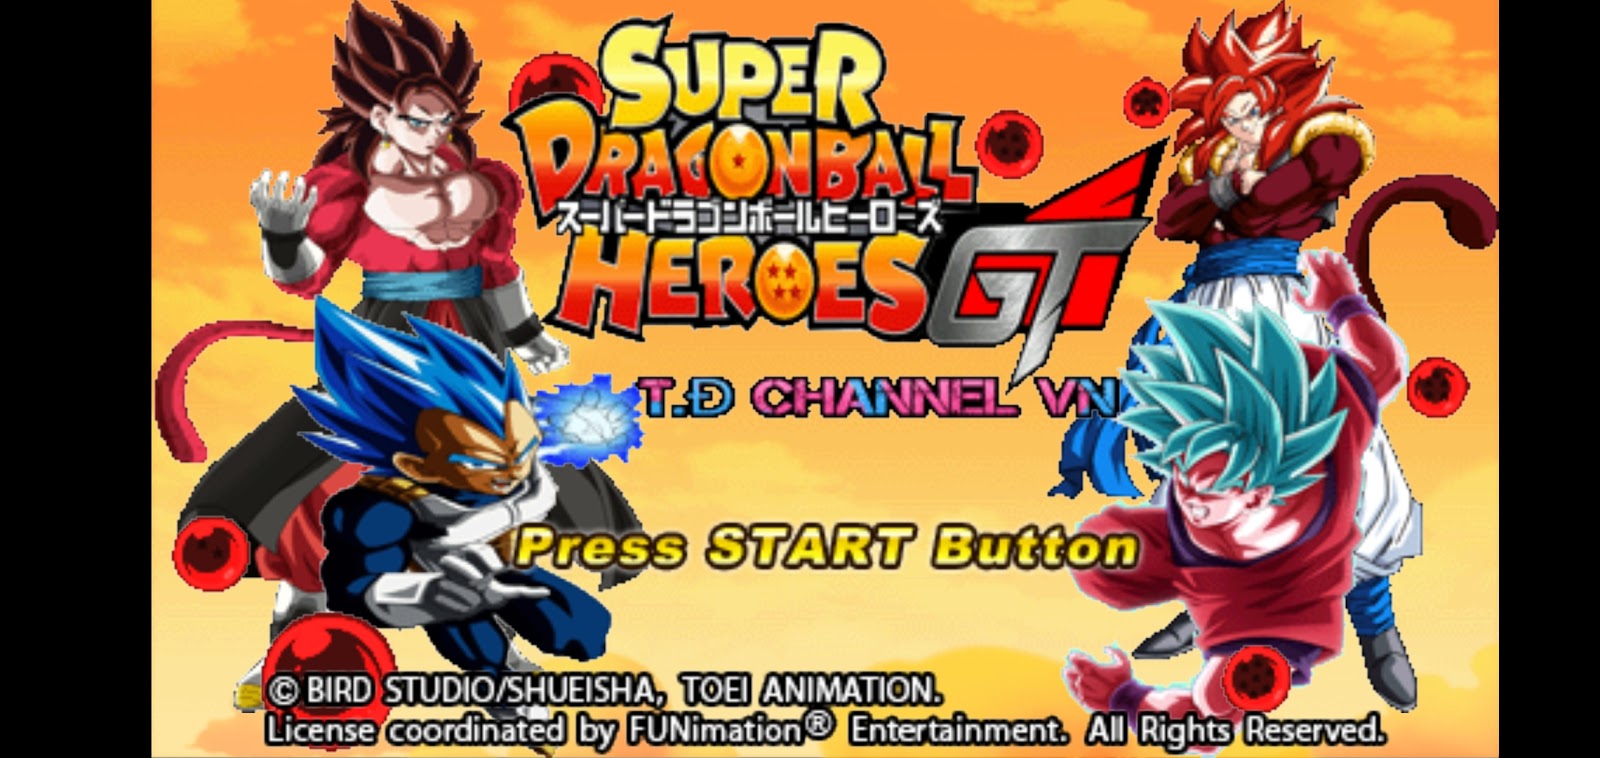 Dragon Ball Super Game Download For Ppsspp This is a mod